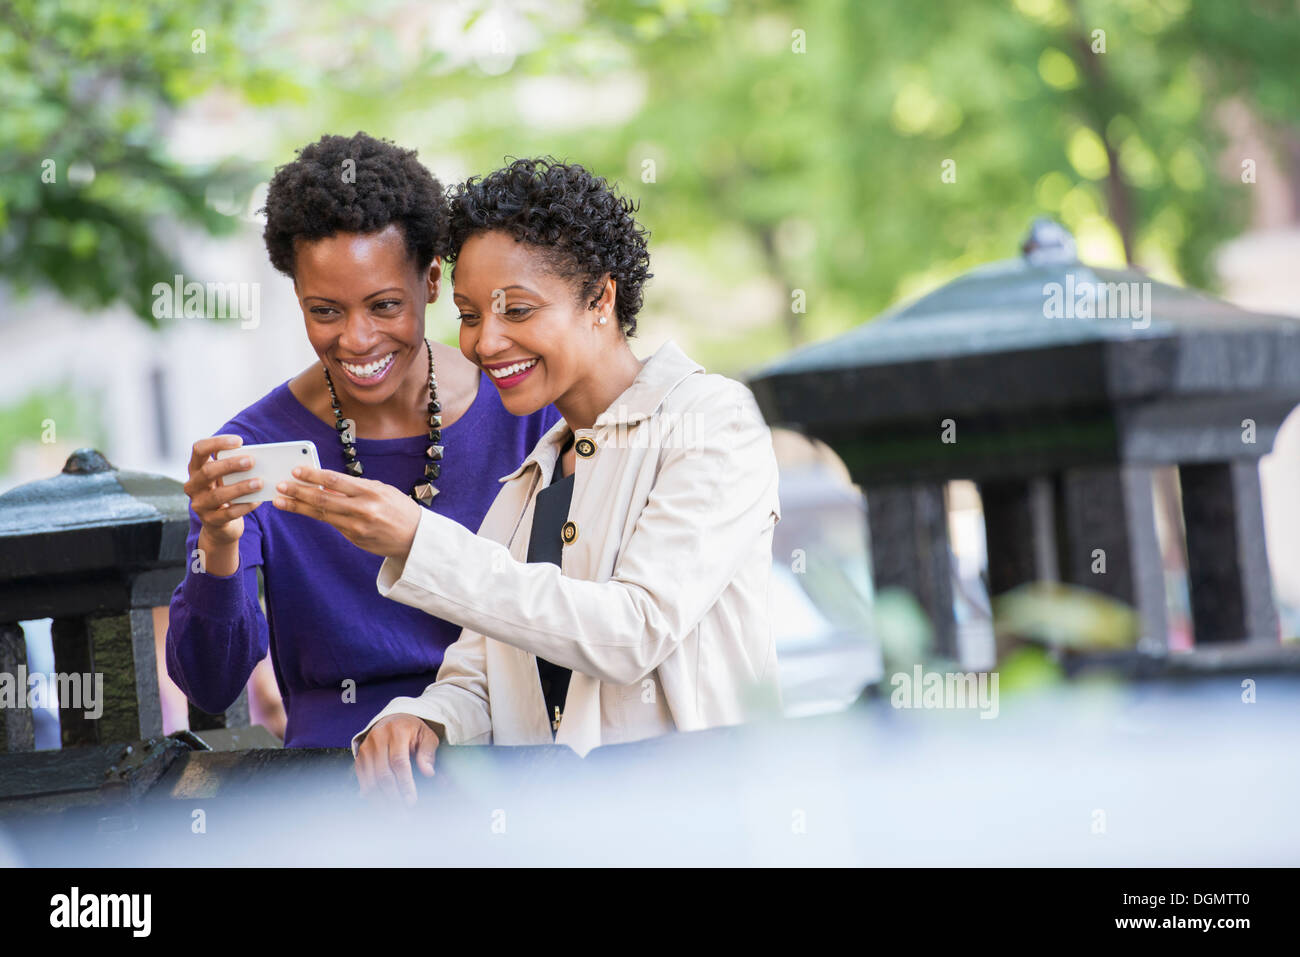 City life. Two women sitting on a park bench, looking at a smart phone. Stock Photo